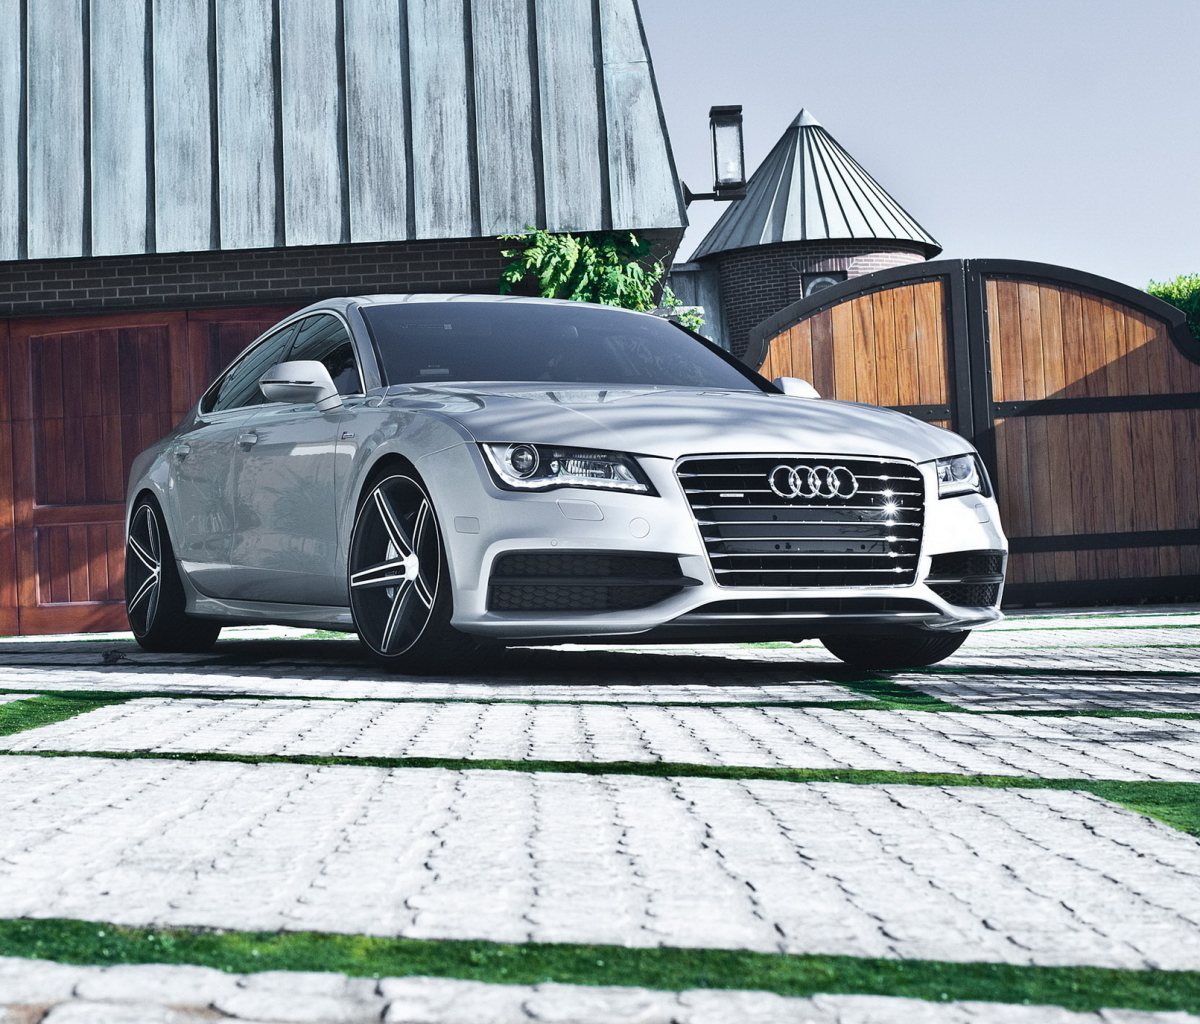 Cool Backgrounds  Audi